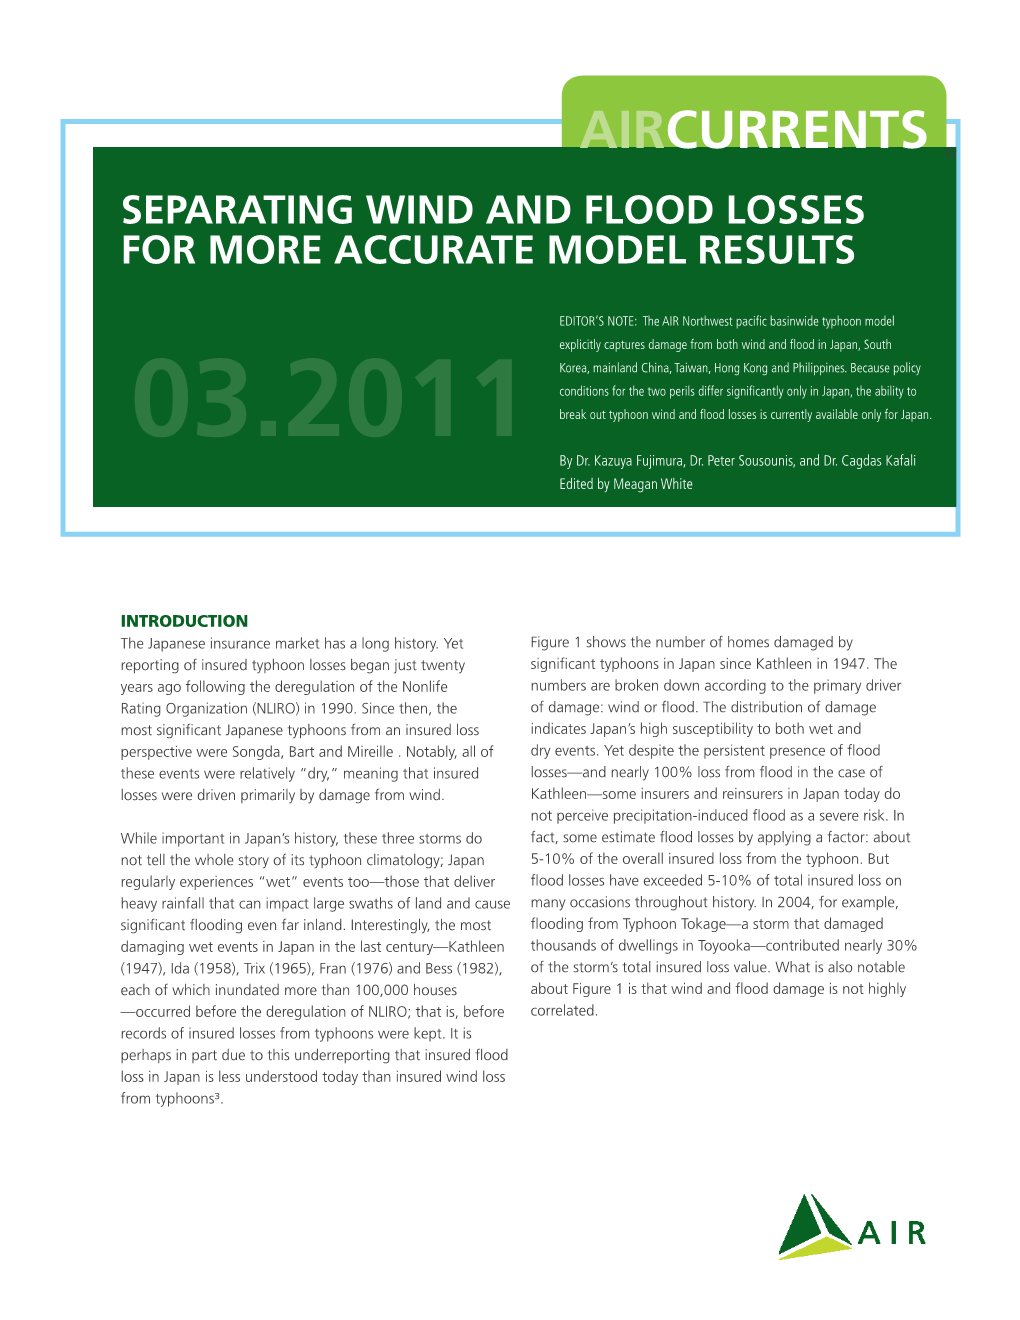 Separating Wind and Flood Losses for More Accurate Model Results